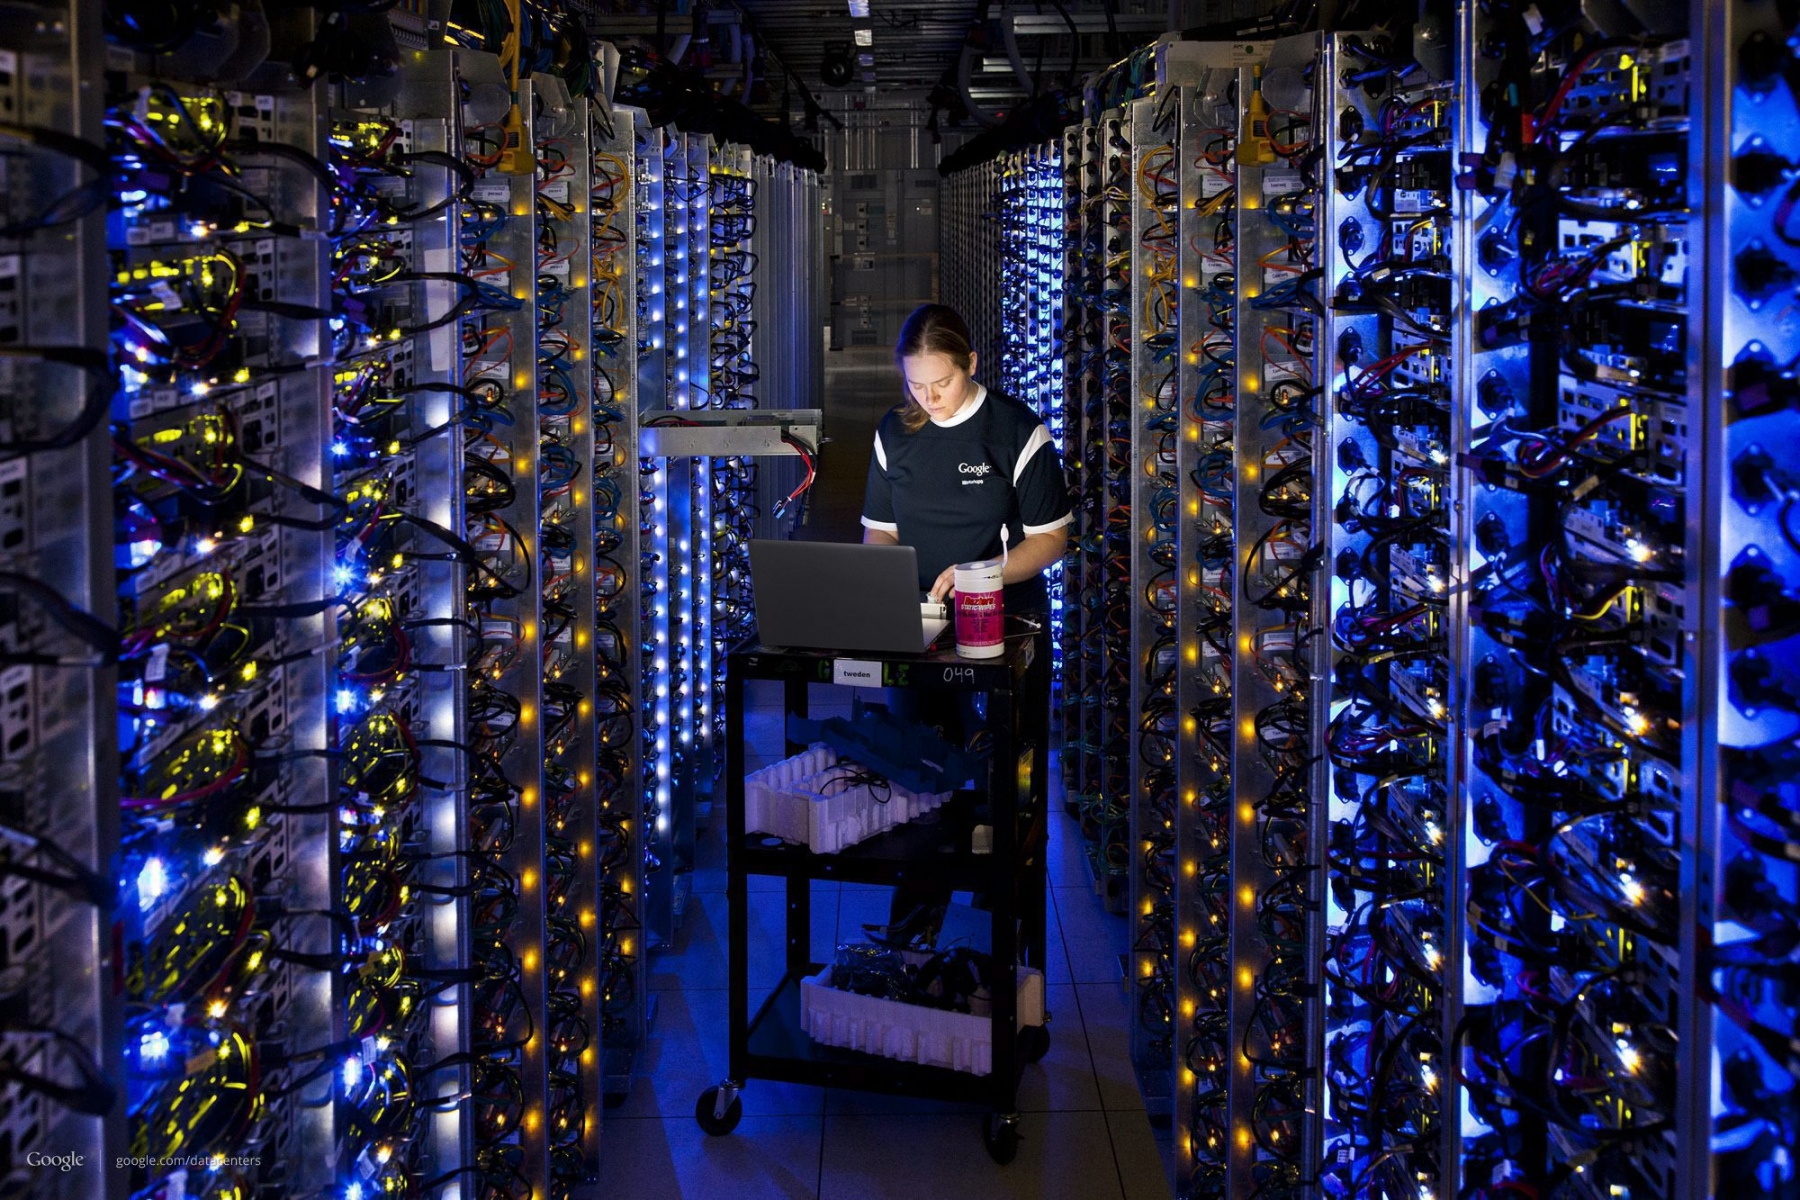 epa03438732 An undated handout photo provided by Google on 19 October 2012 shows Google technician Denise Hardwood diagnosing an overheated CPU, at a Google Data Center in the Dalles, Oregon, USA. Shares in Google slumped badly 18 October, forcing trading to be suspended when a negative earnings report was accidentally released early, shocking investors with its report of lower profits and advertising prices. Shares in the high-flying company dropped more than 9 per cent as it emerged that the internet giant missed market expectations. Trading resumed around 90 minutes before the end of the day, and the shares closed 8 per cent down. The quarterly earnings report had been scheduled for release after the close of trading, but Google said in a press release that it had mistakenly been filed by the companyÄôs financial printers RR Donnelley.  EPA/GOOGLE HANDOUT  HANDOUT EDITORIAL USE ONLY/NO SALES